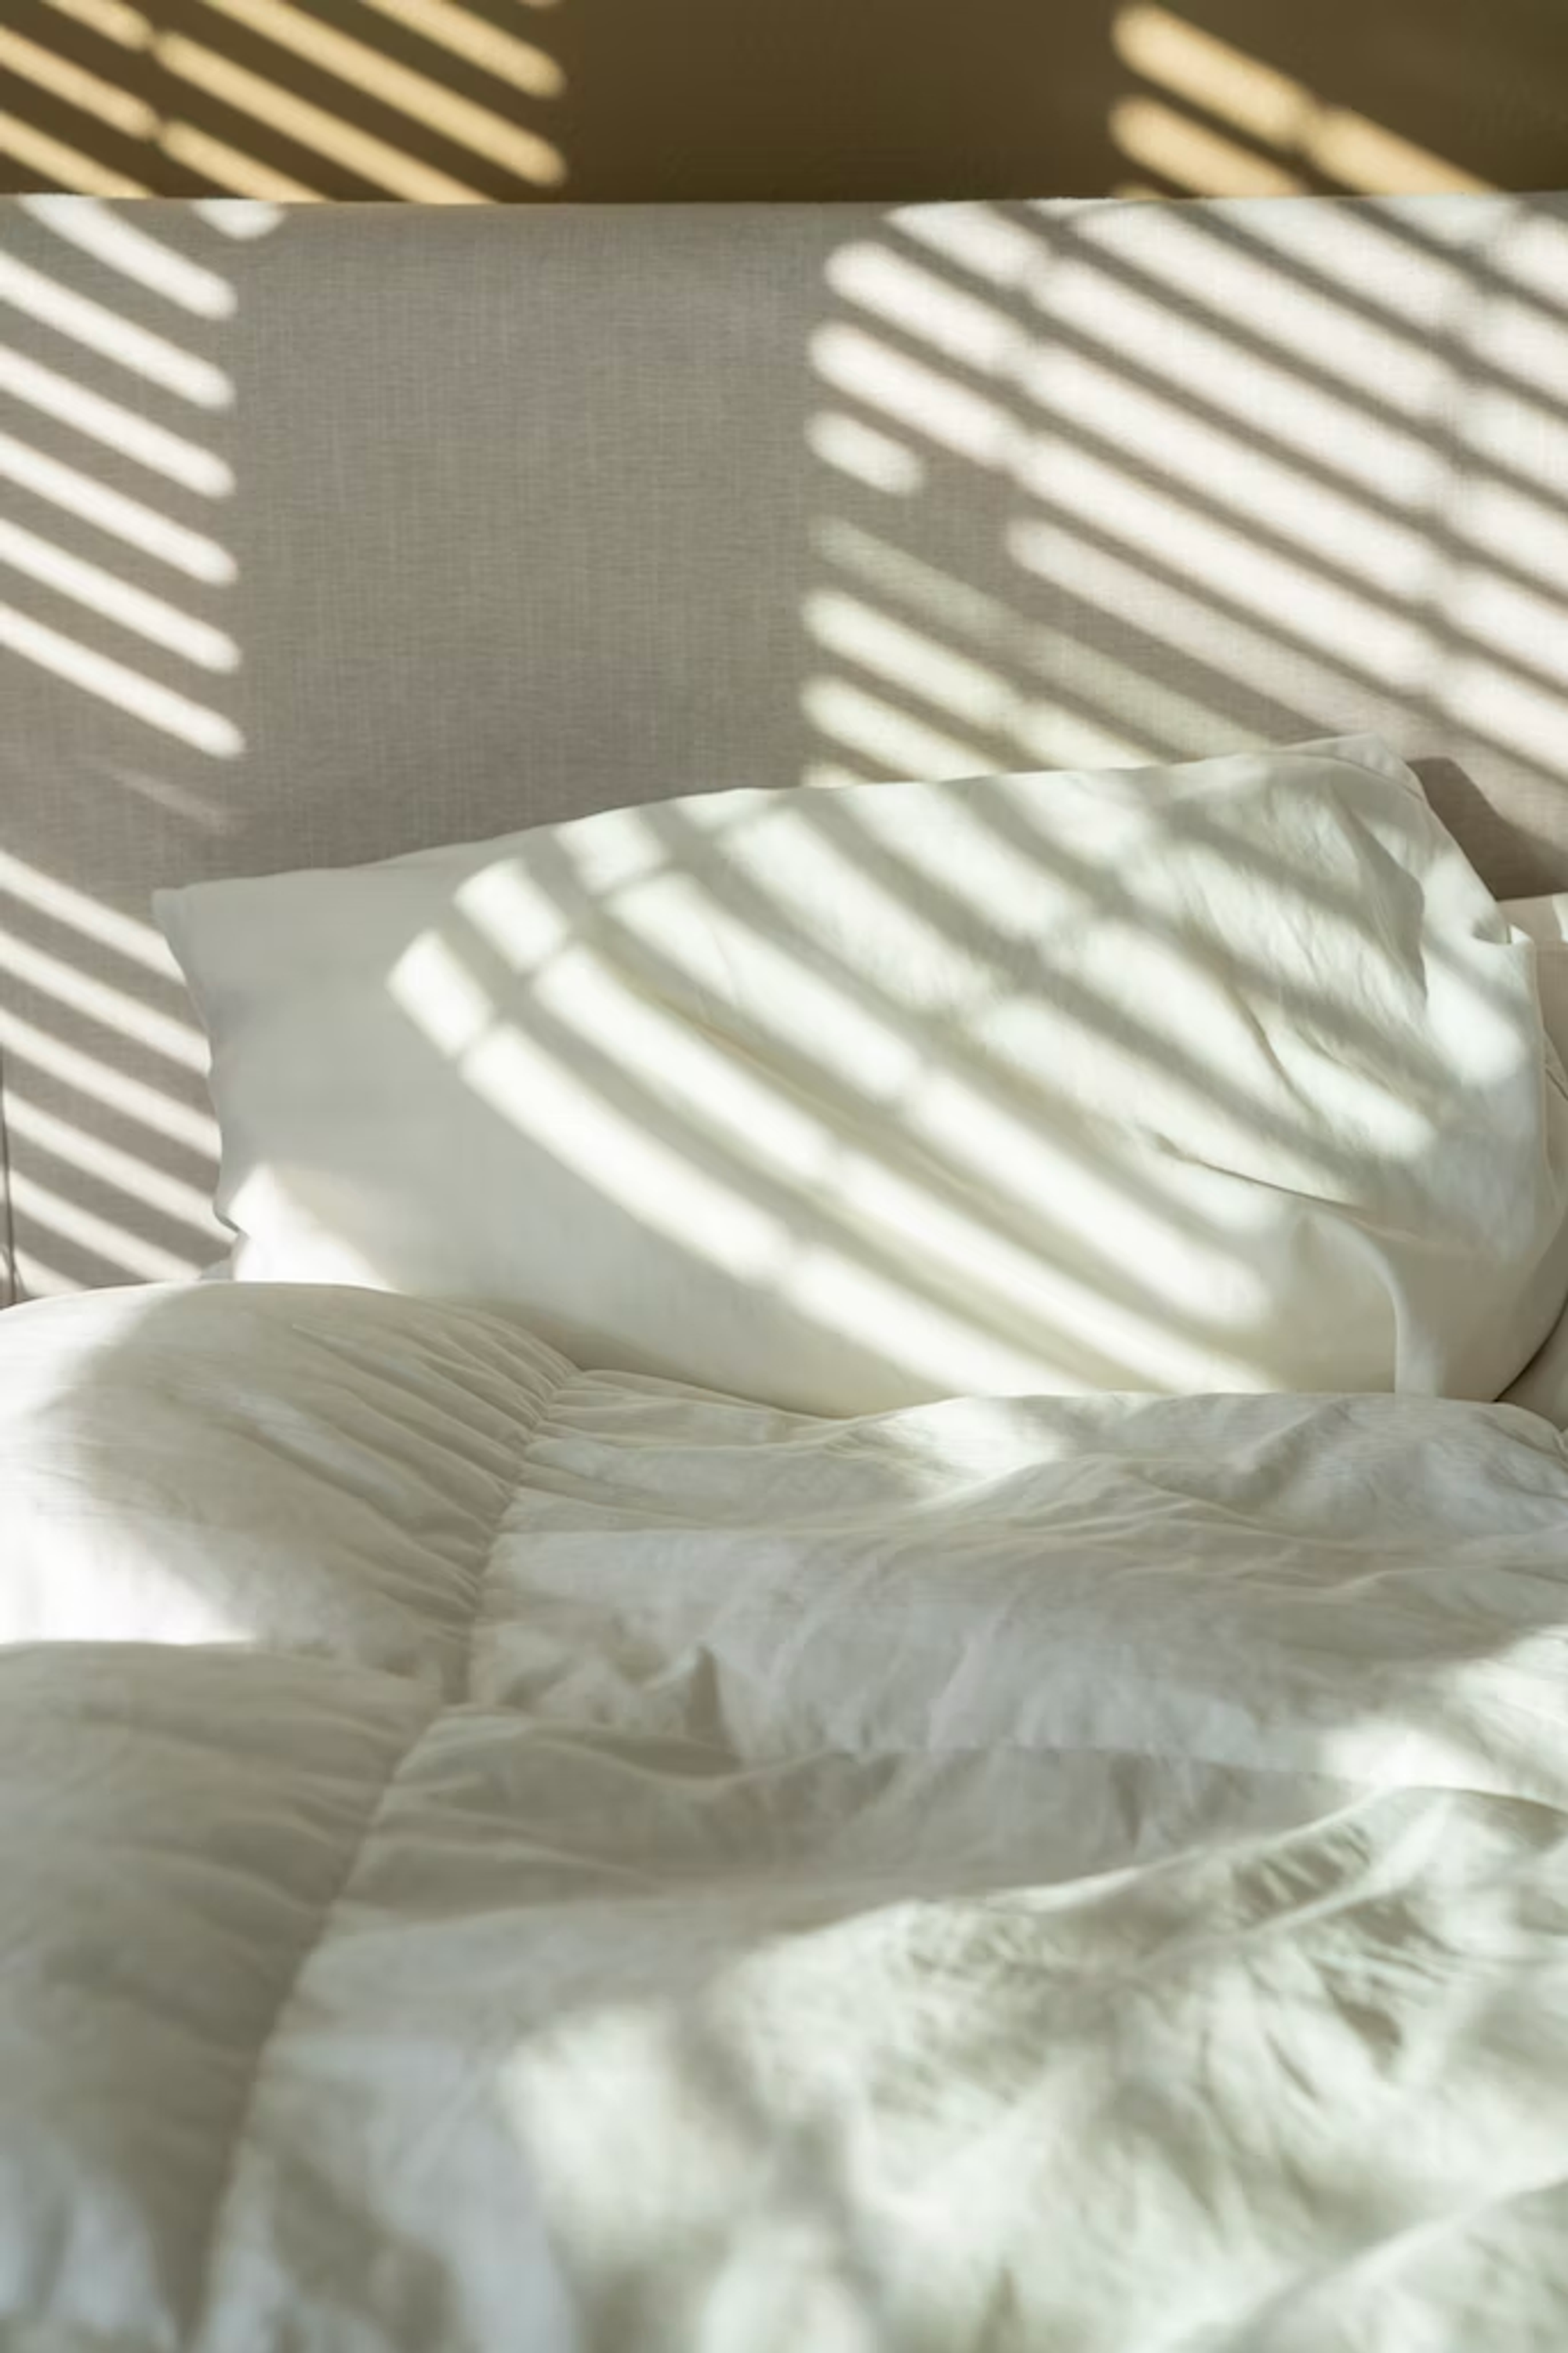 Practice Feng Shui in your sleeping space to promote a sense of calm